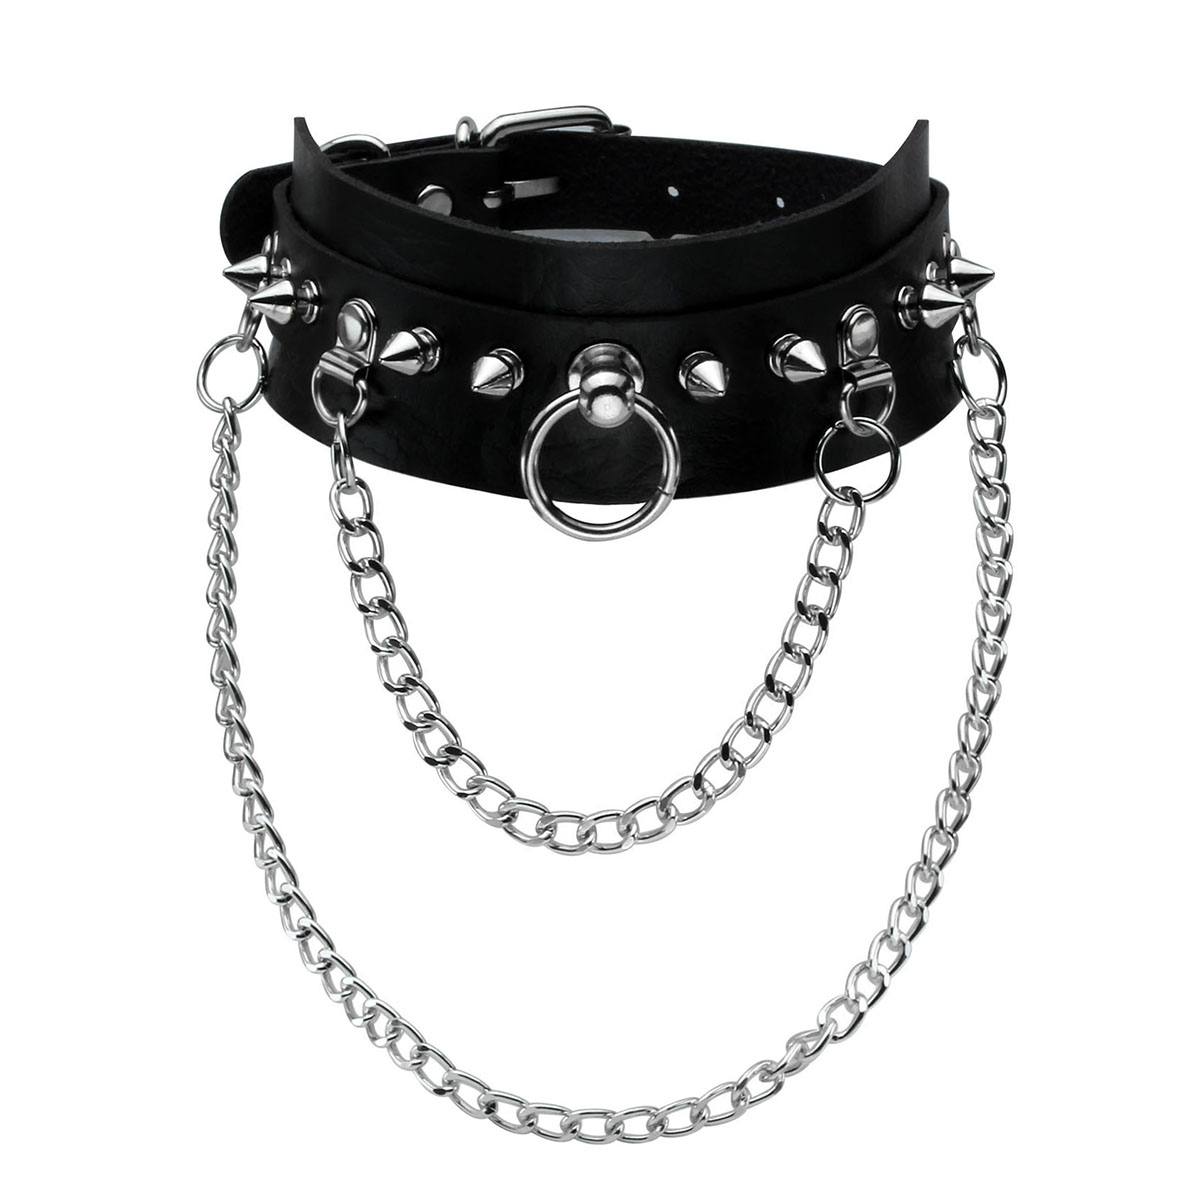 Punk gothic faux leather collar O-ring choker necklace with chains